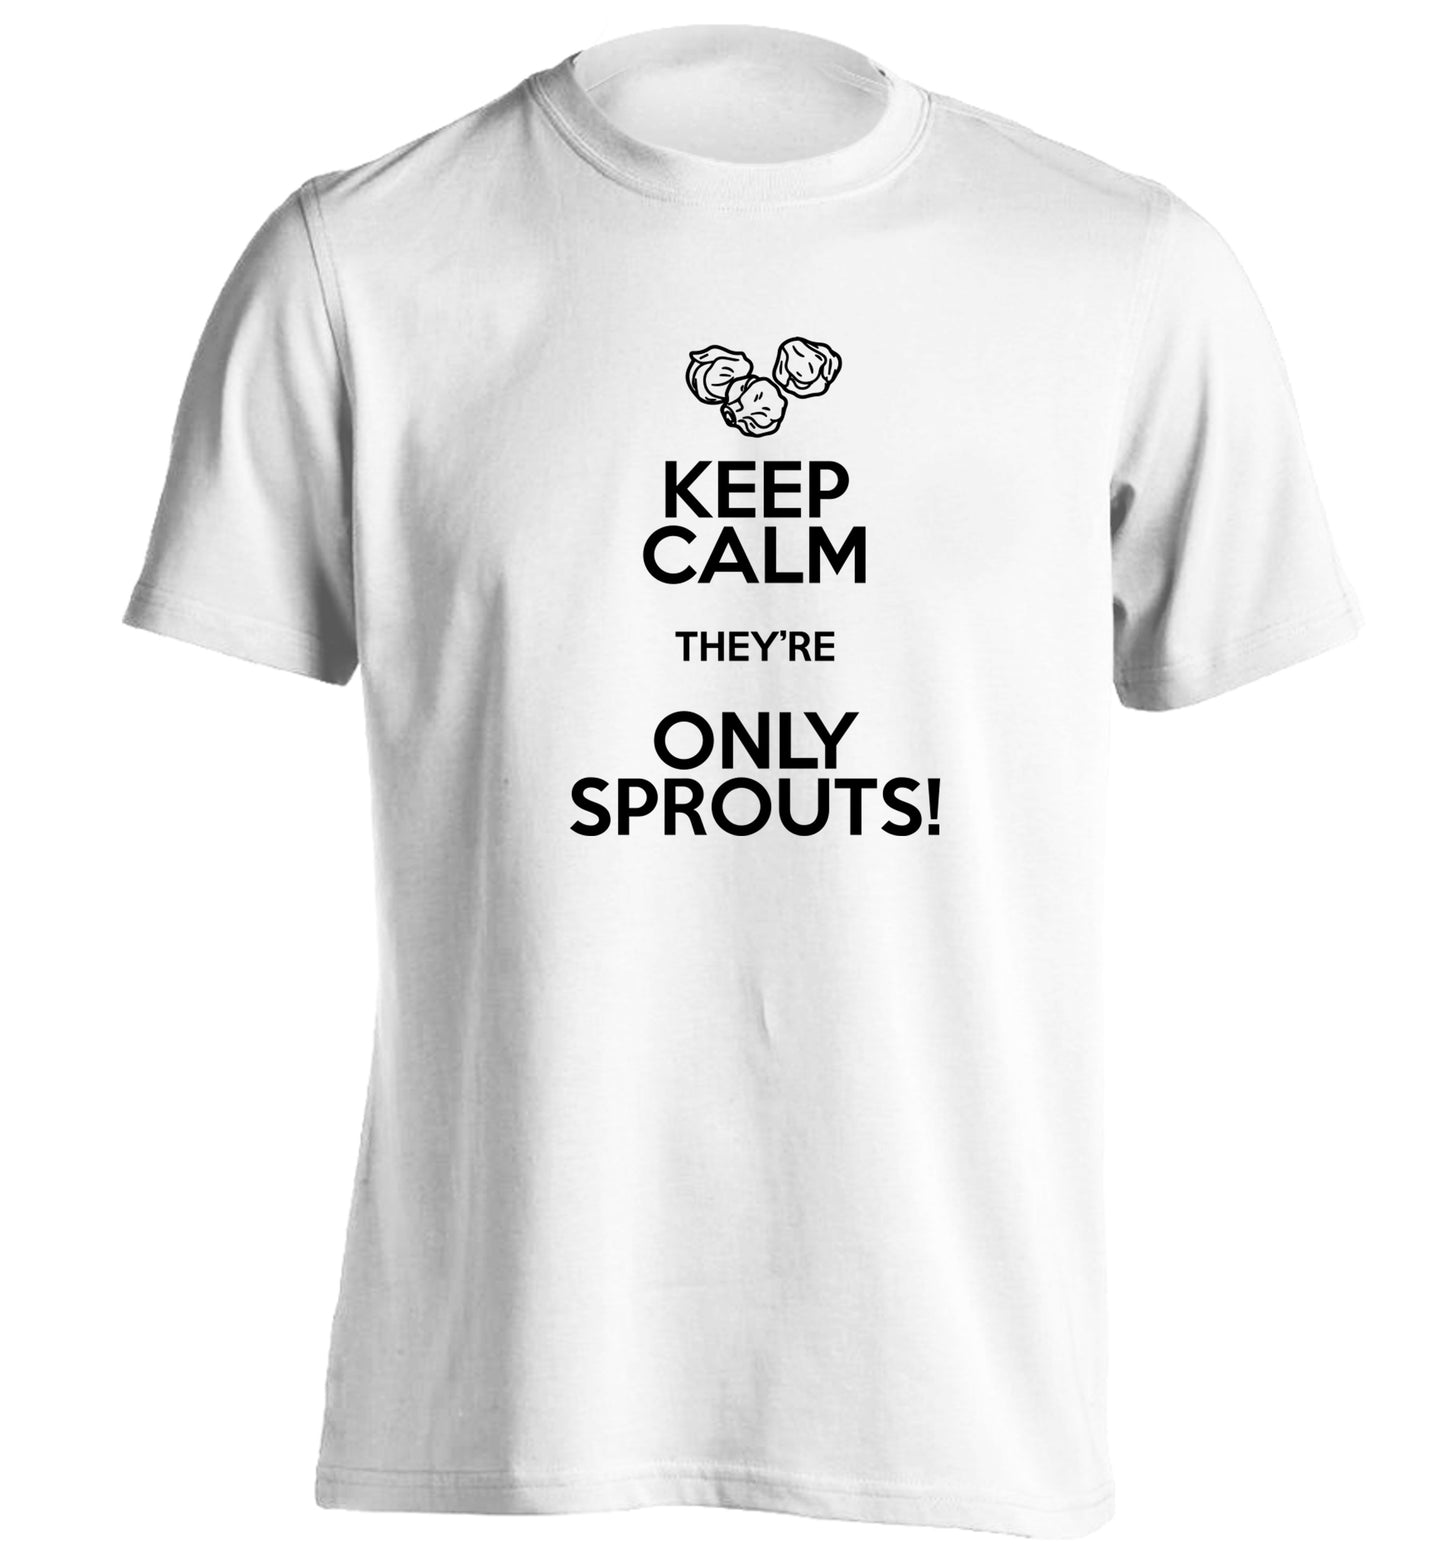 Keep calm they're only sprouts adults unisex white Tshirt 2XL